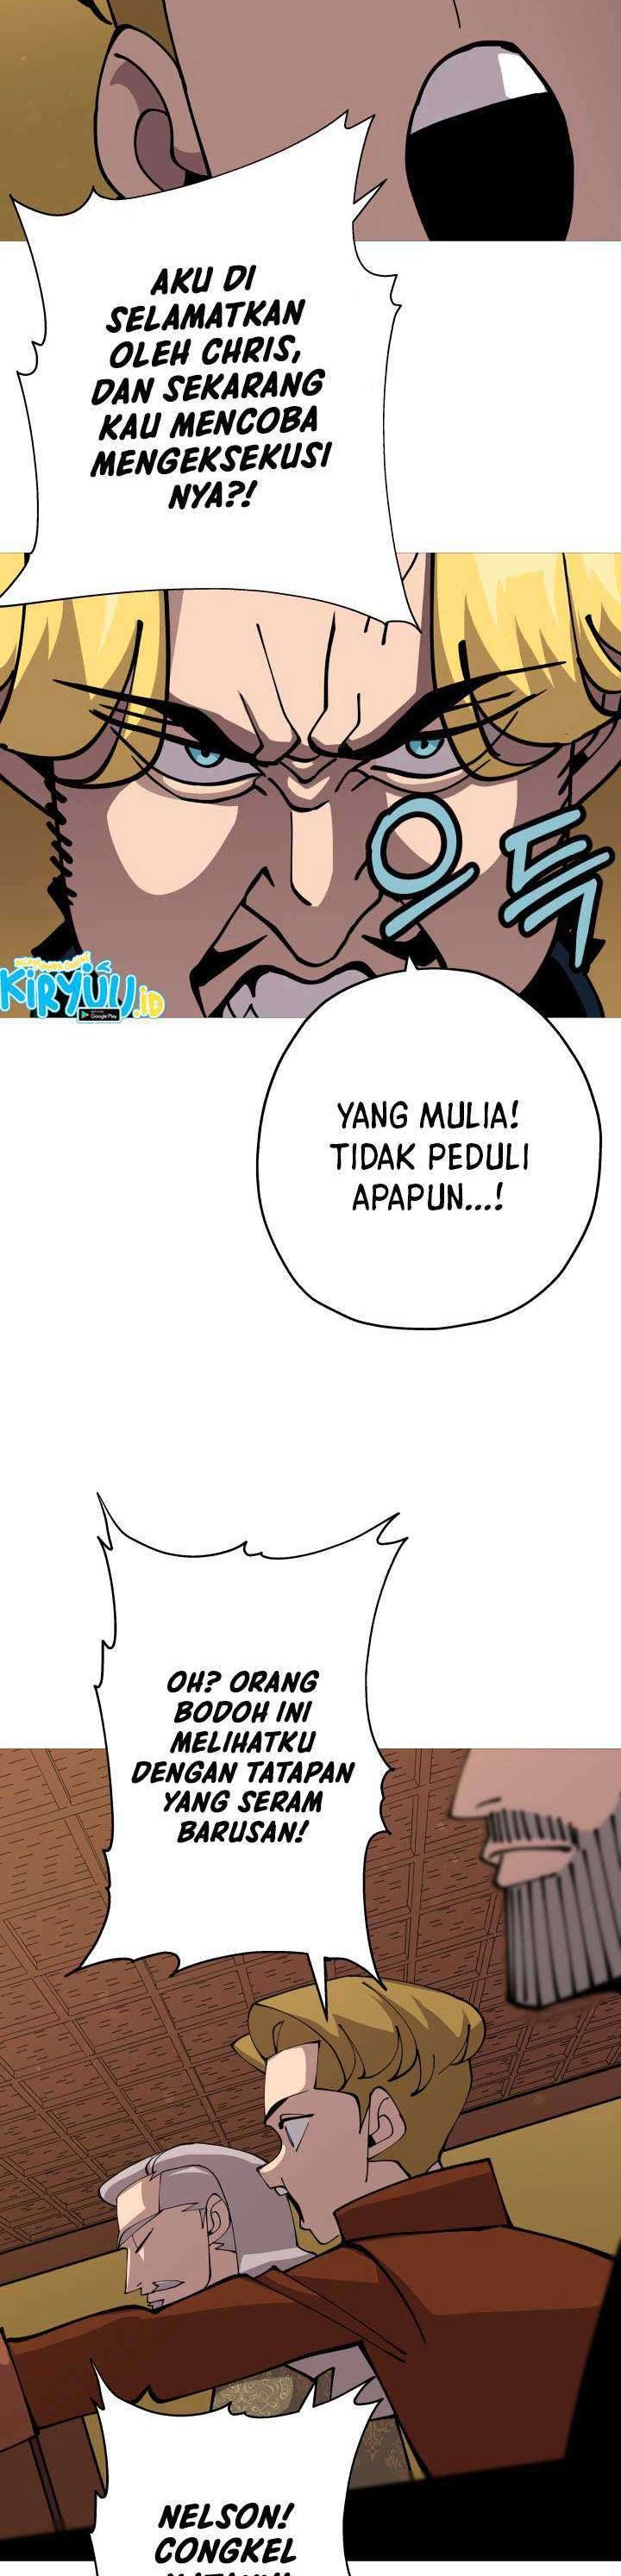 Dilarang COPAS - situs resmi www.mangacanblog.com - Komik the story of a low rank soldier becoming a monarch 034 - chapter 34 35 Indonesia the story of a low rank soldier becoming a monarch 034 - chapter 34 Terbaru 23|Baca Manga Komik Indonesia|Mangacan